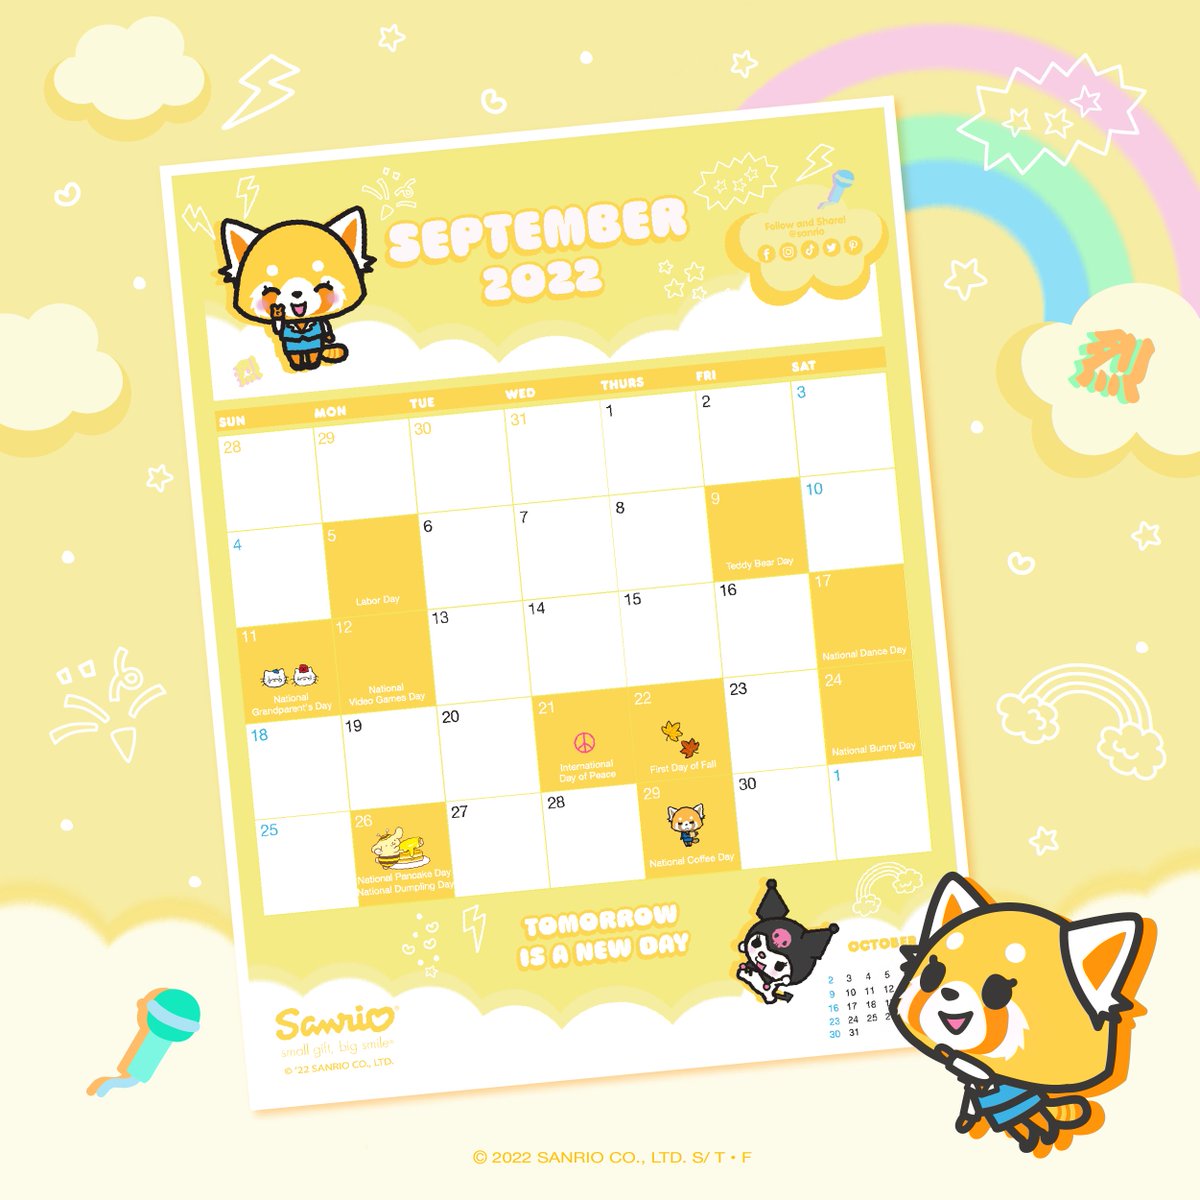 Sanrio on Twitter: "Say hello to a new month with @aggretsuko 🗓🧡